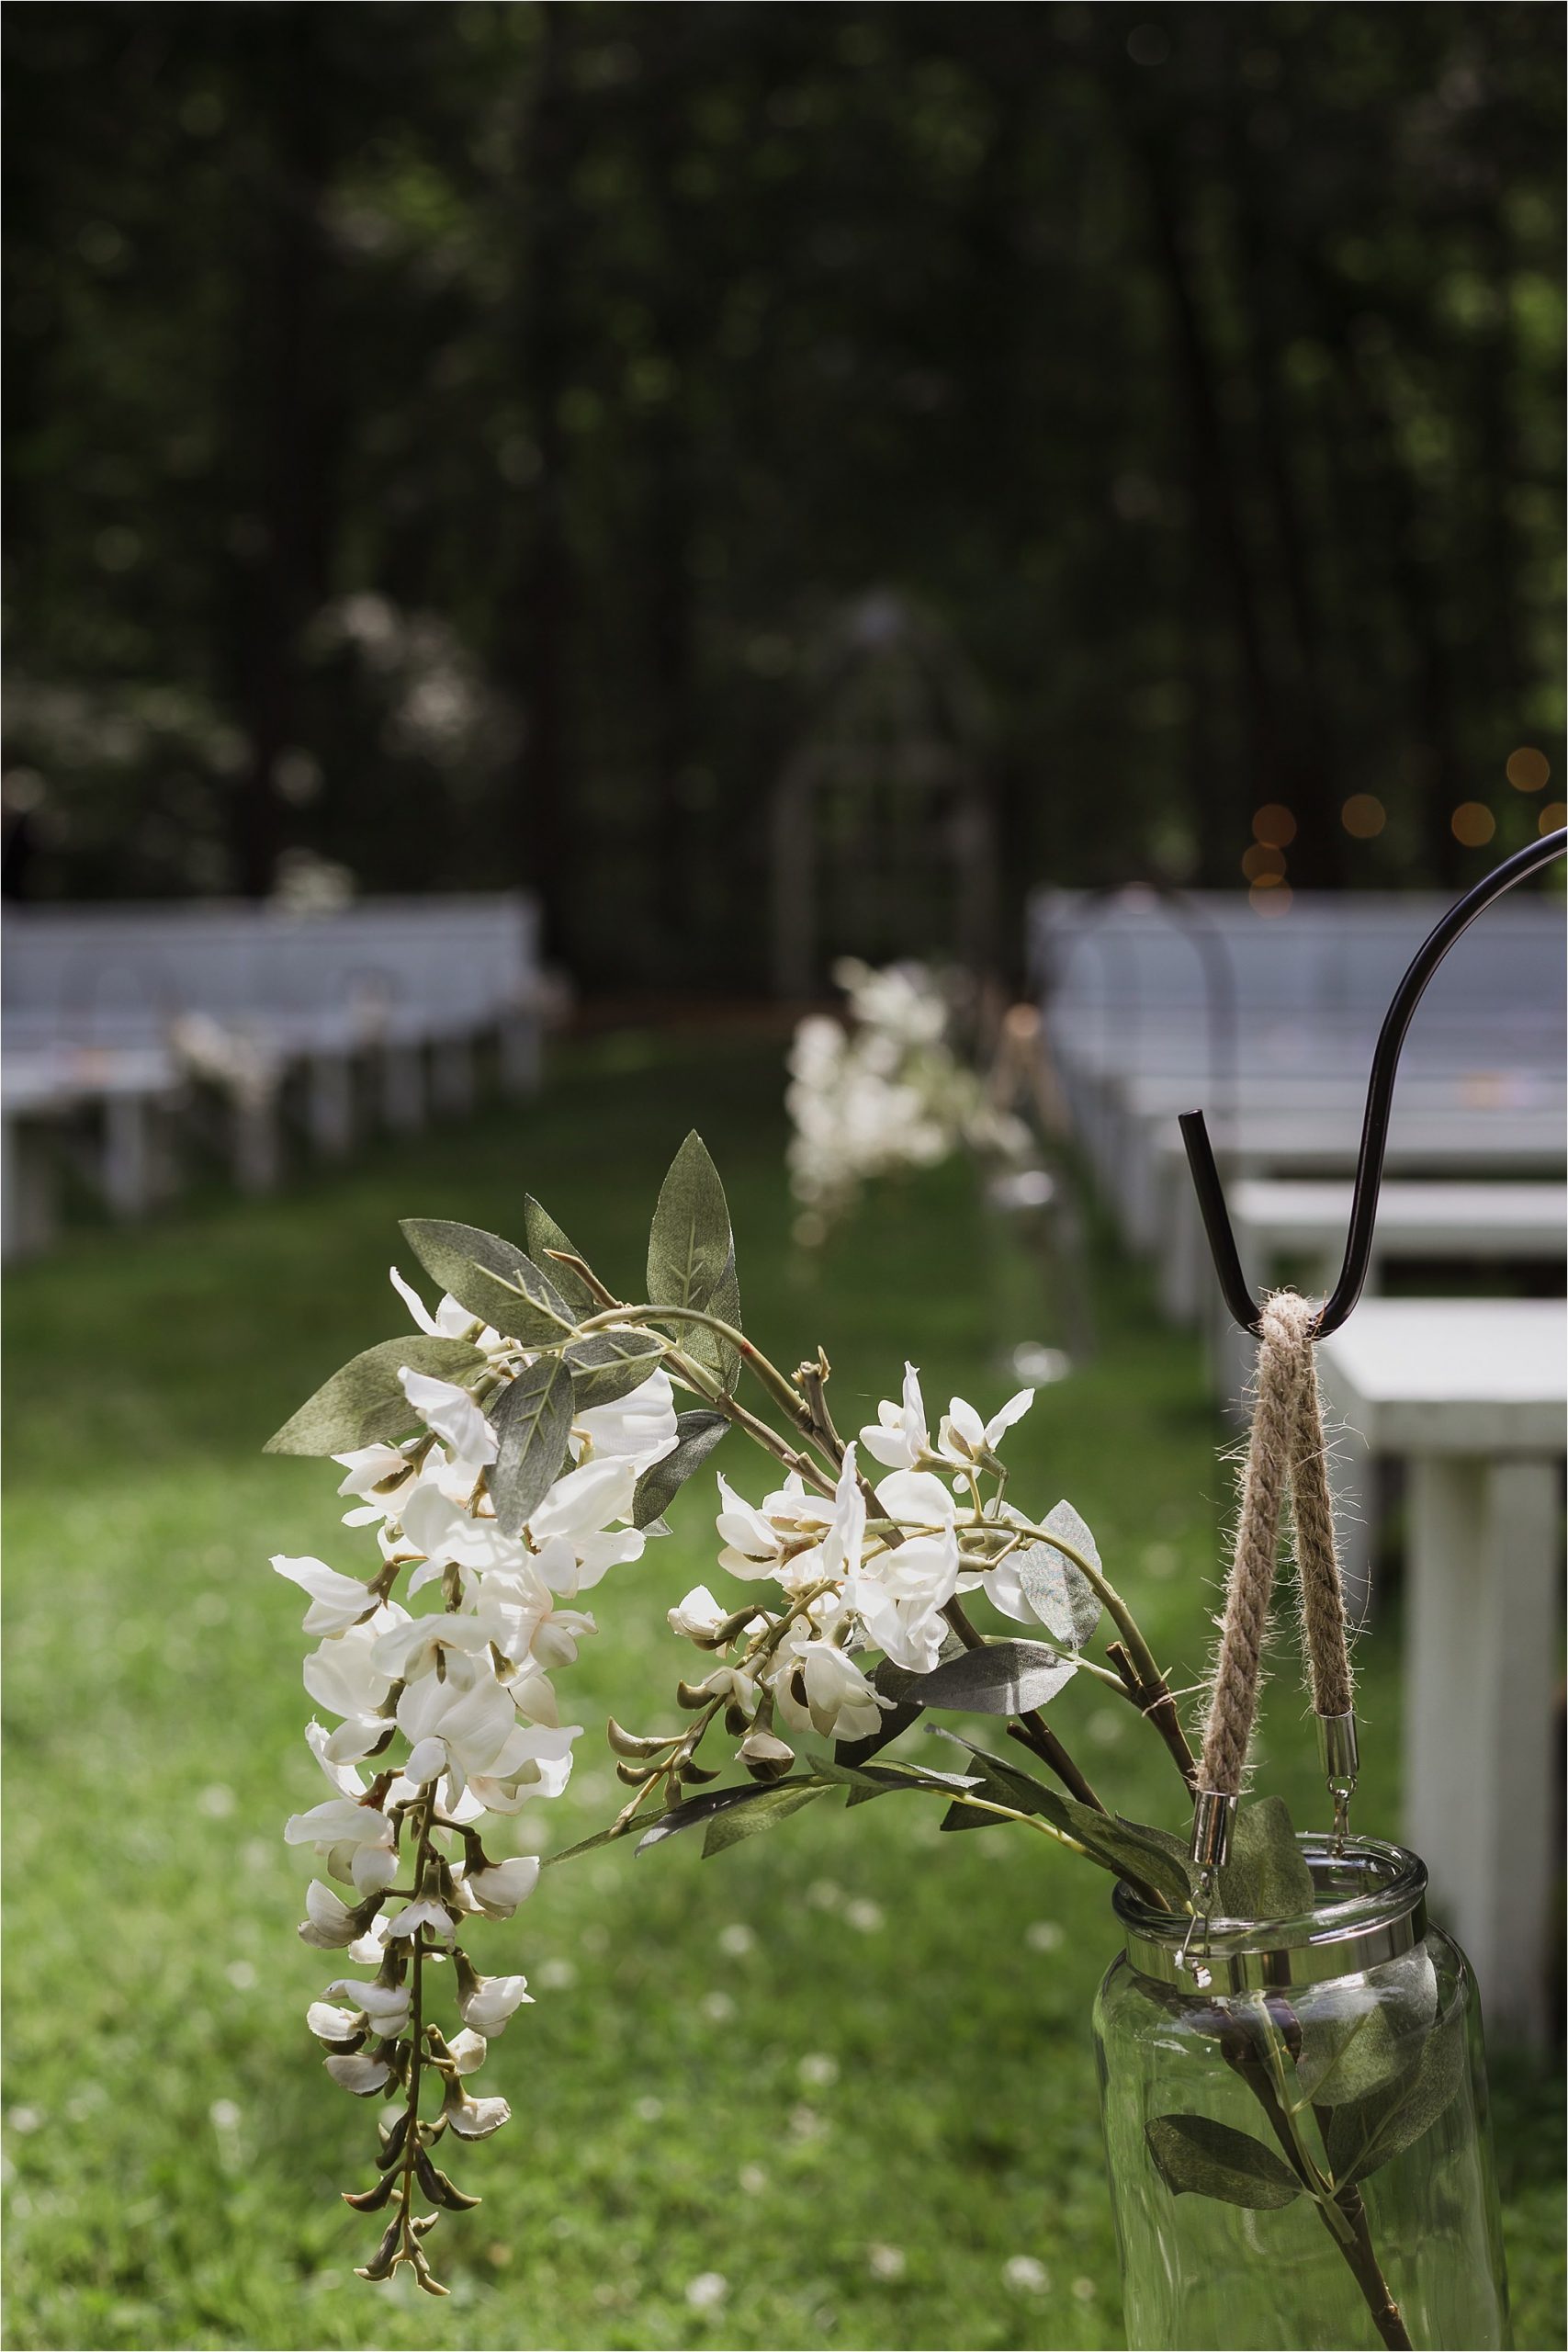 The Clearing wedding venue ceremony decoration with benches and floral mason jar arrangements